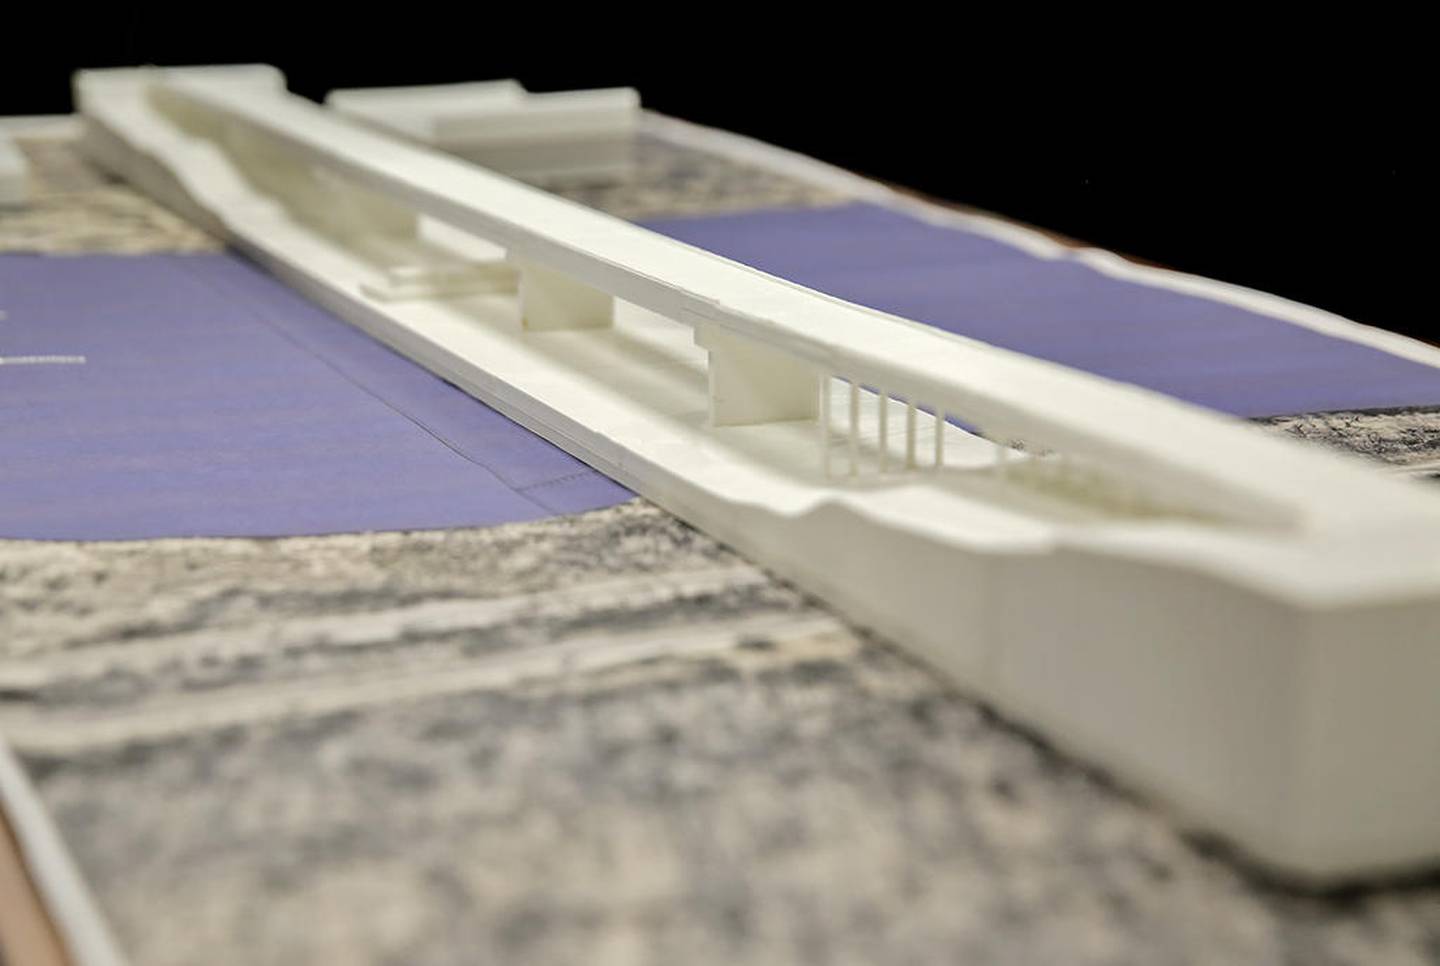 This 3D printed model of a future Houbolt Road bridge over the Des Plaines River was used during an open house on the project held in August 2018 at Joliet Junior College.